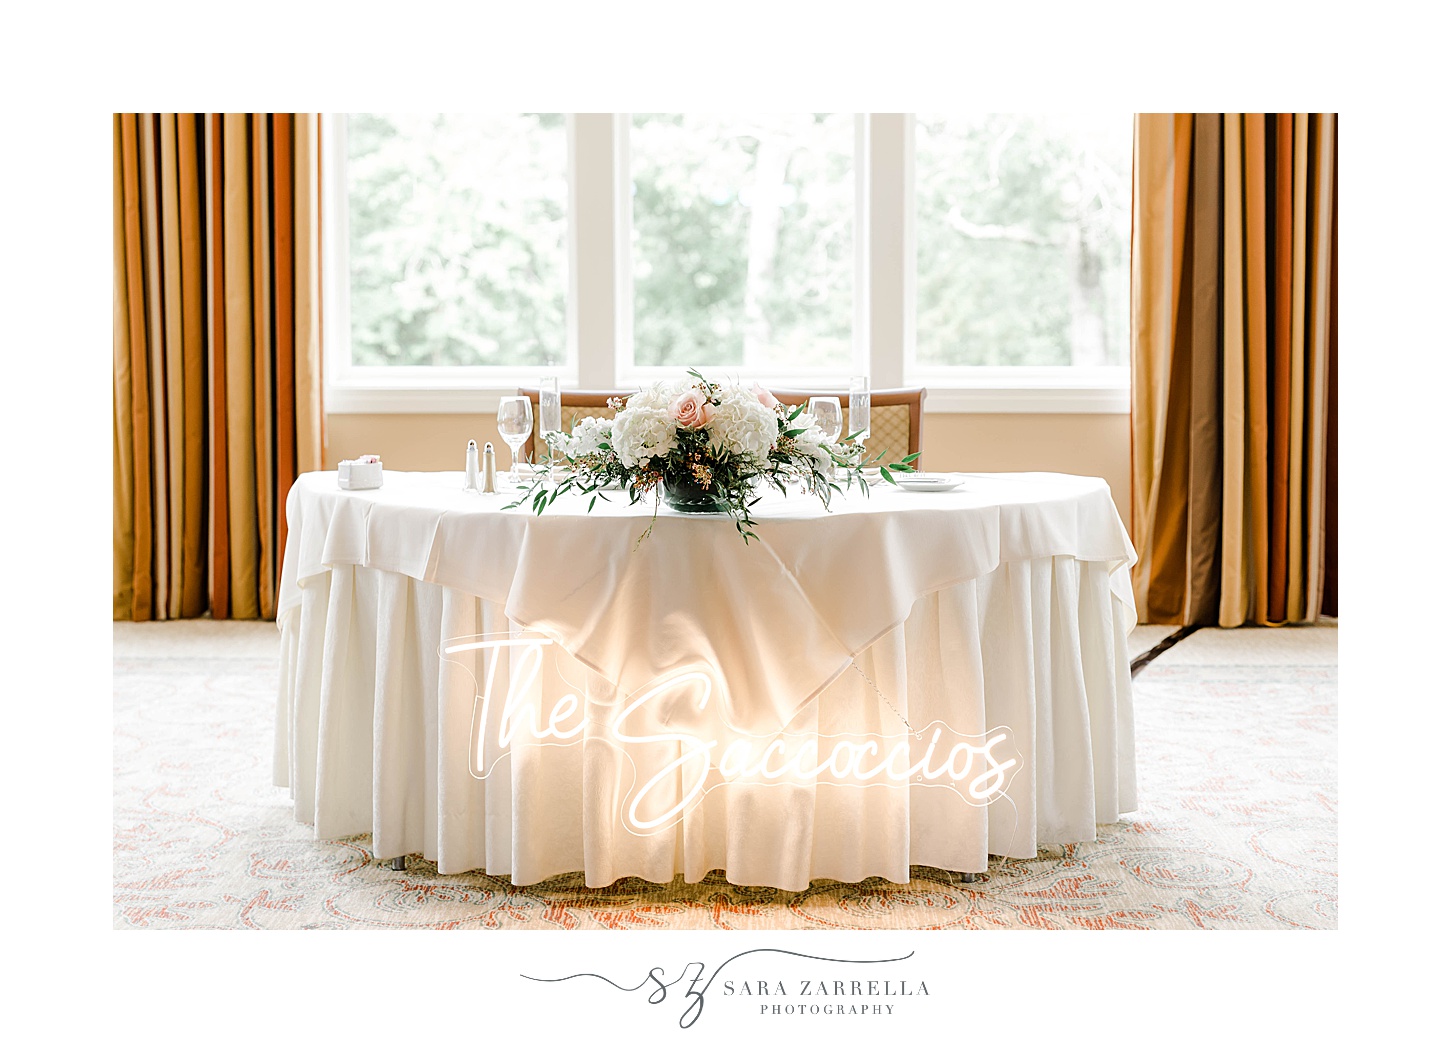 sweetheart table with custom neon sign in front at Lake of Isles